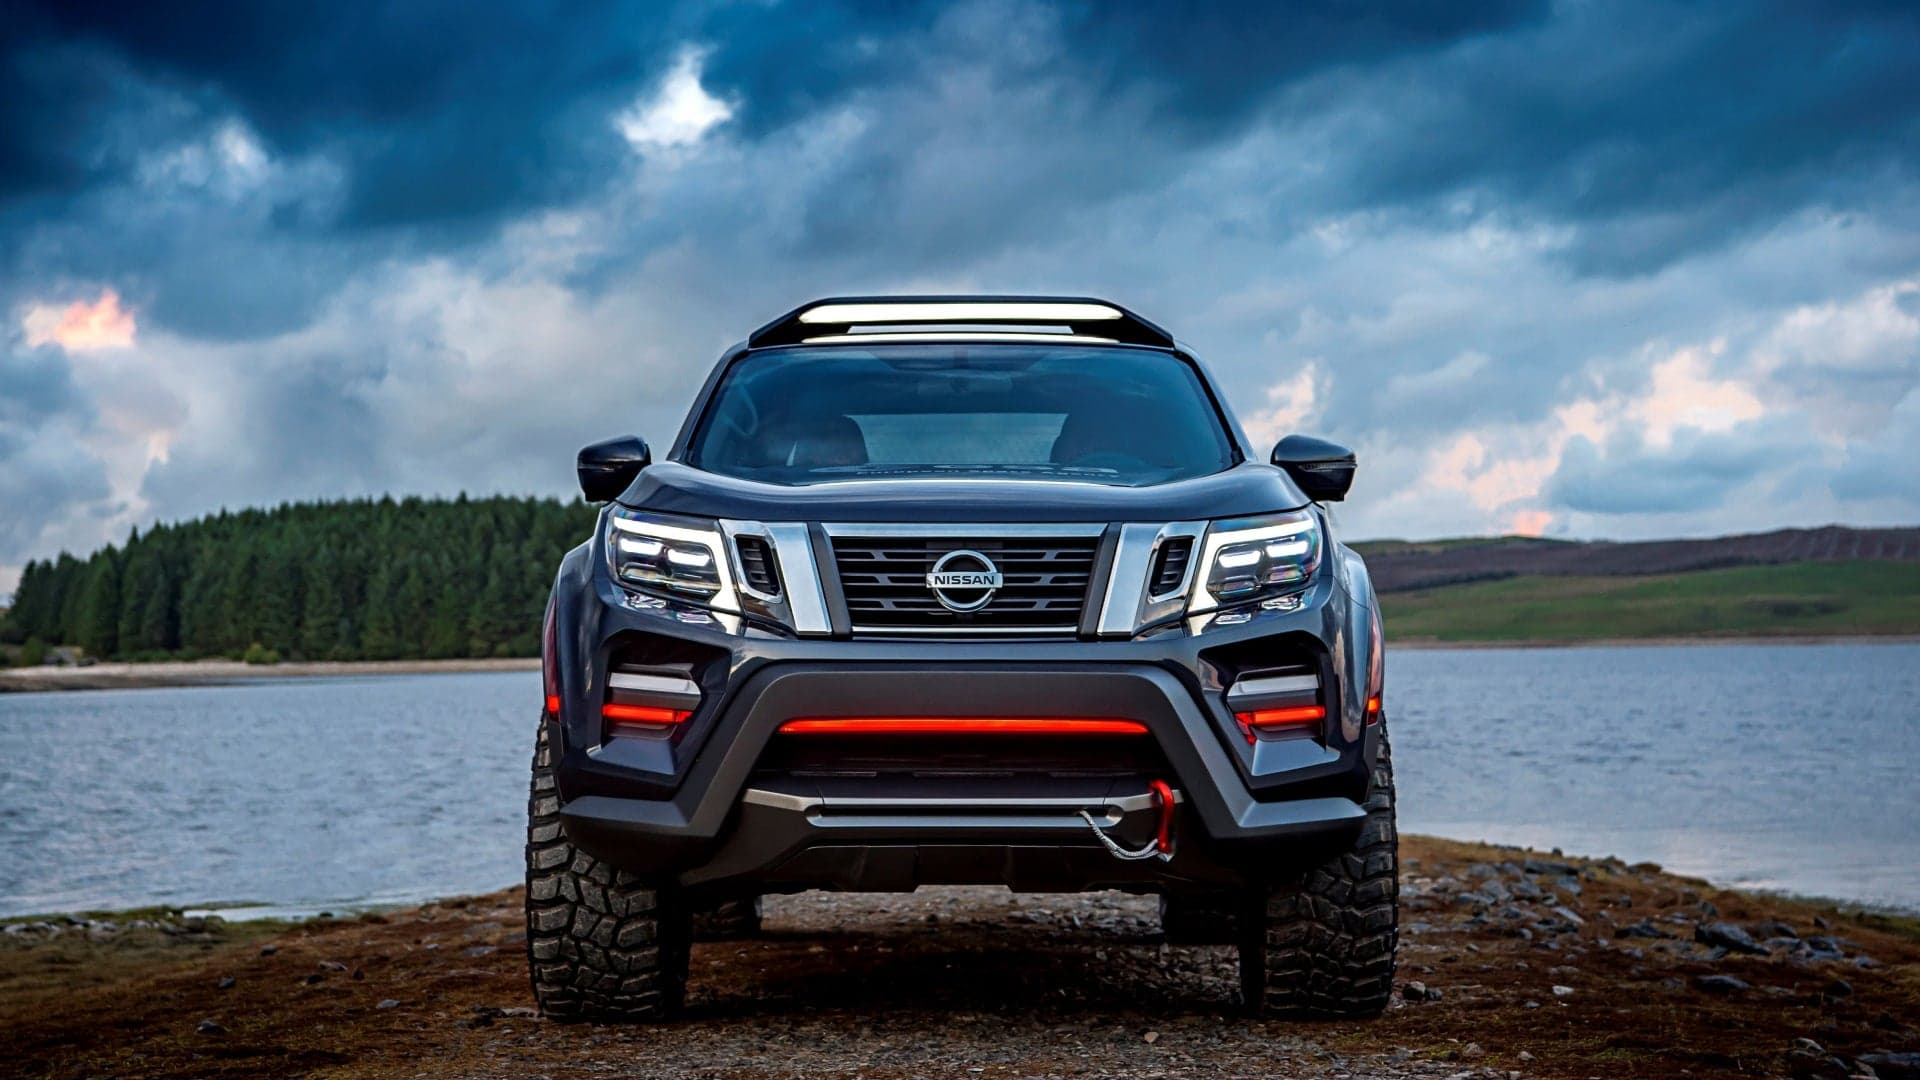 Next Nissan Nismo Model Could be a Raptor-Fighting Off-Road Pickup Truck